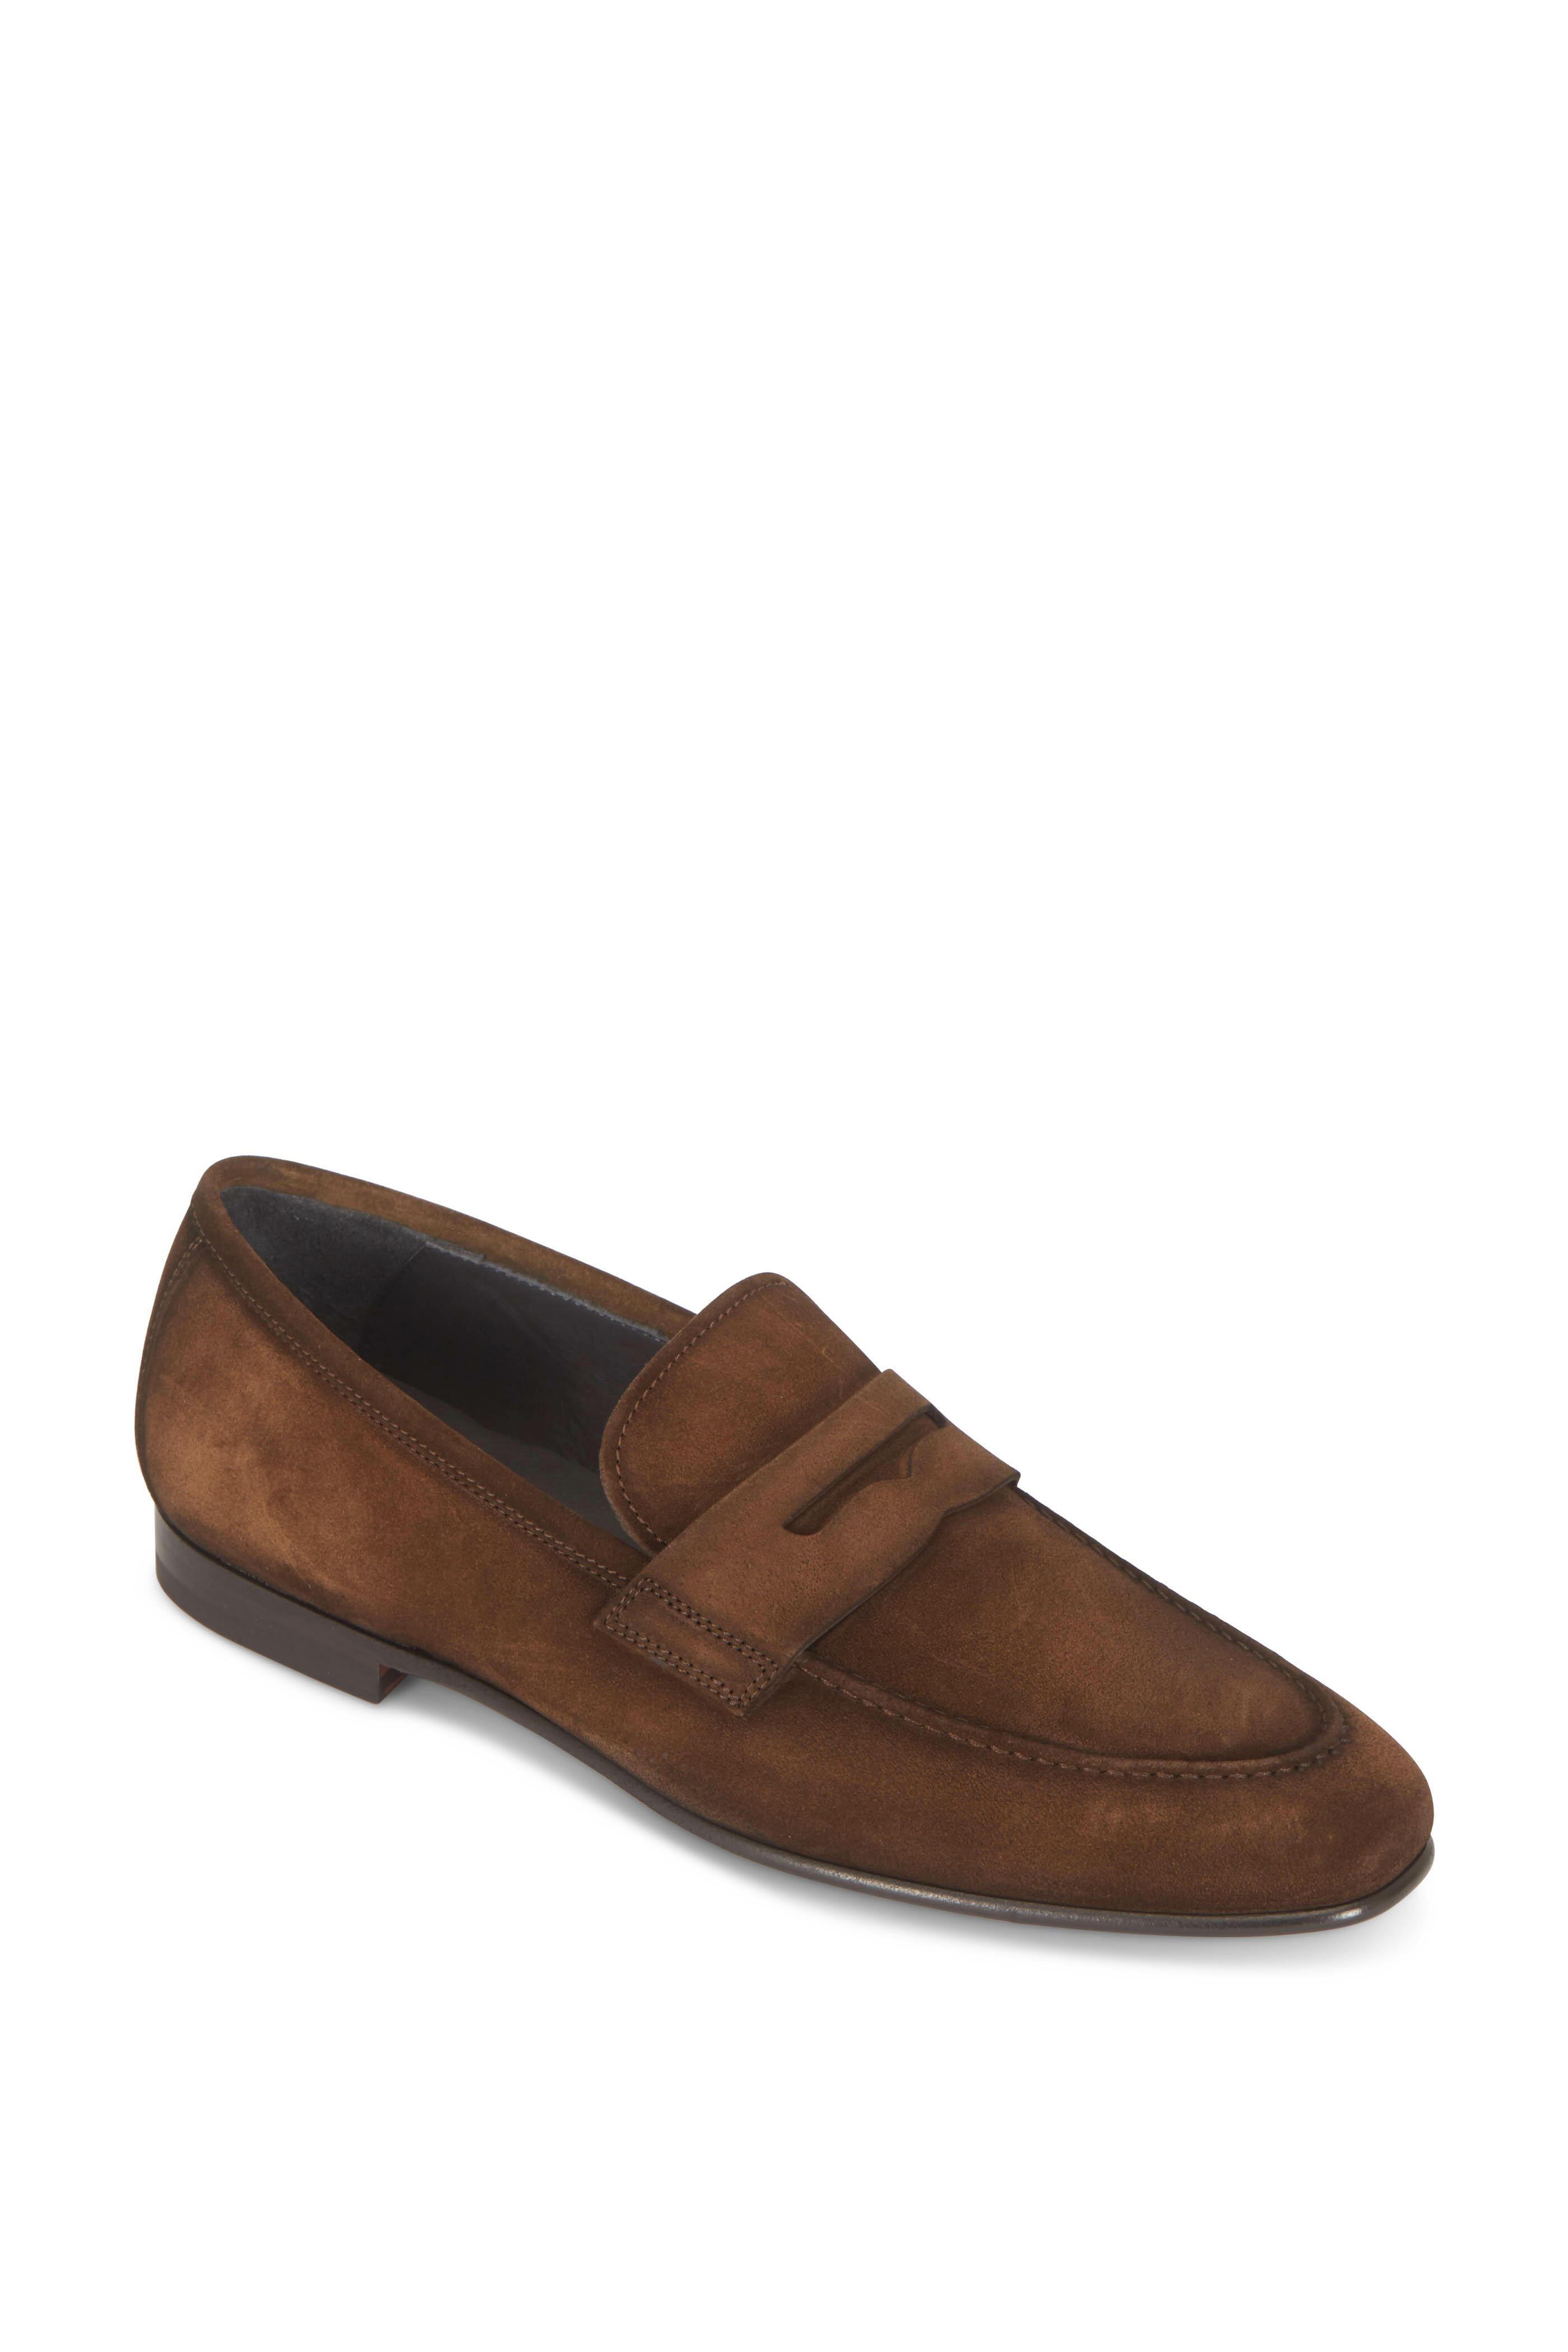 To Boot New York - Enzo Brown Suede Penny Loafer